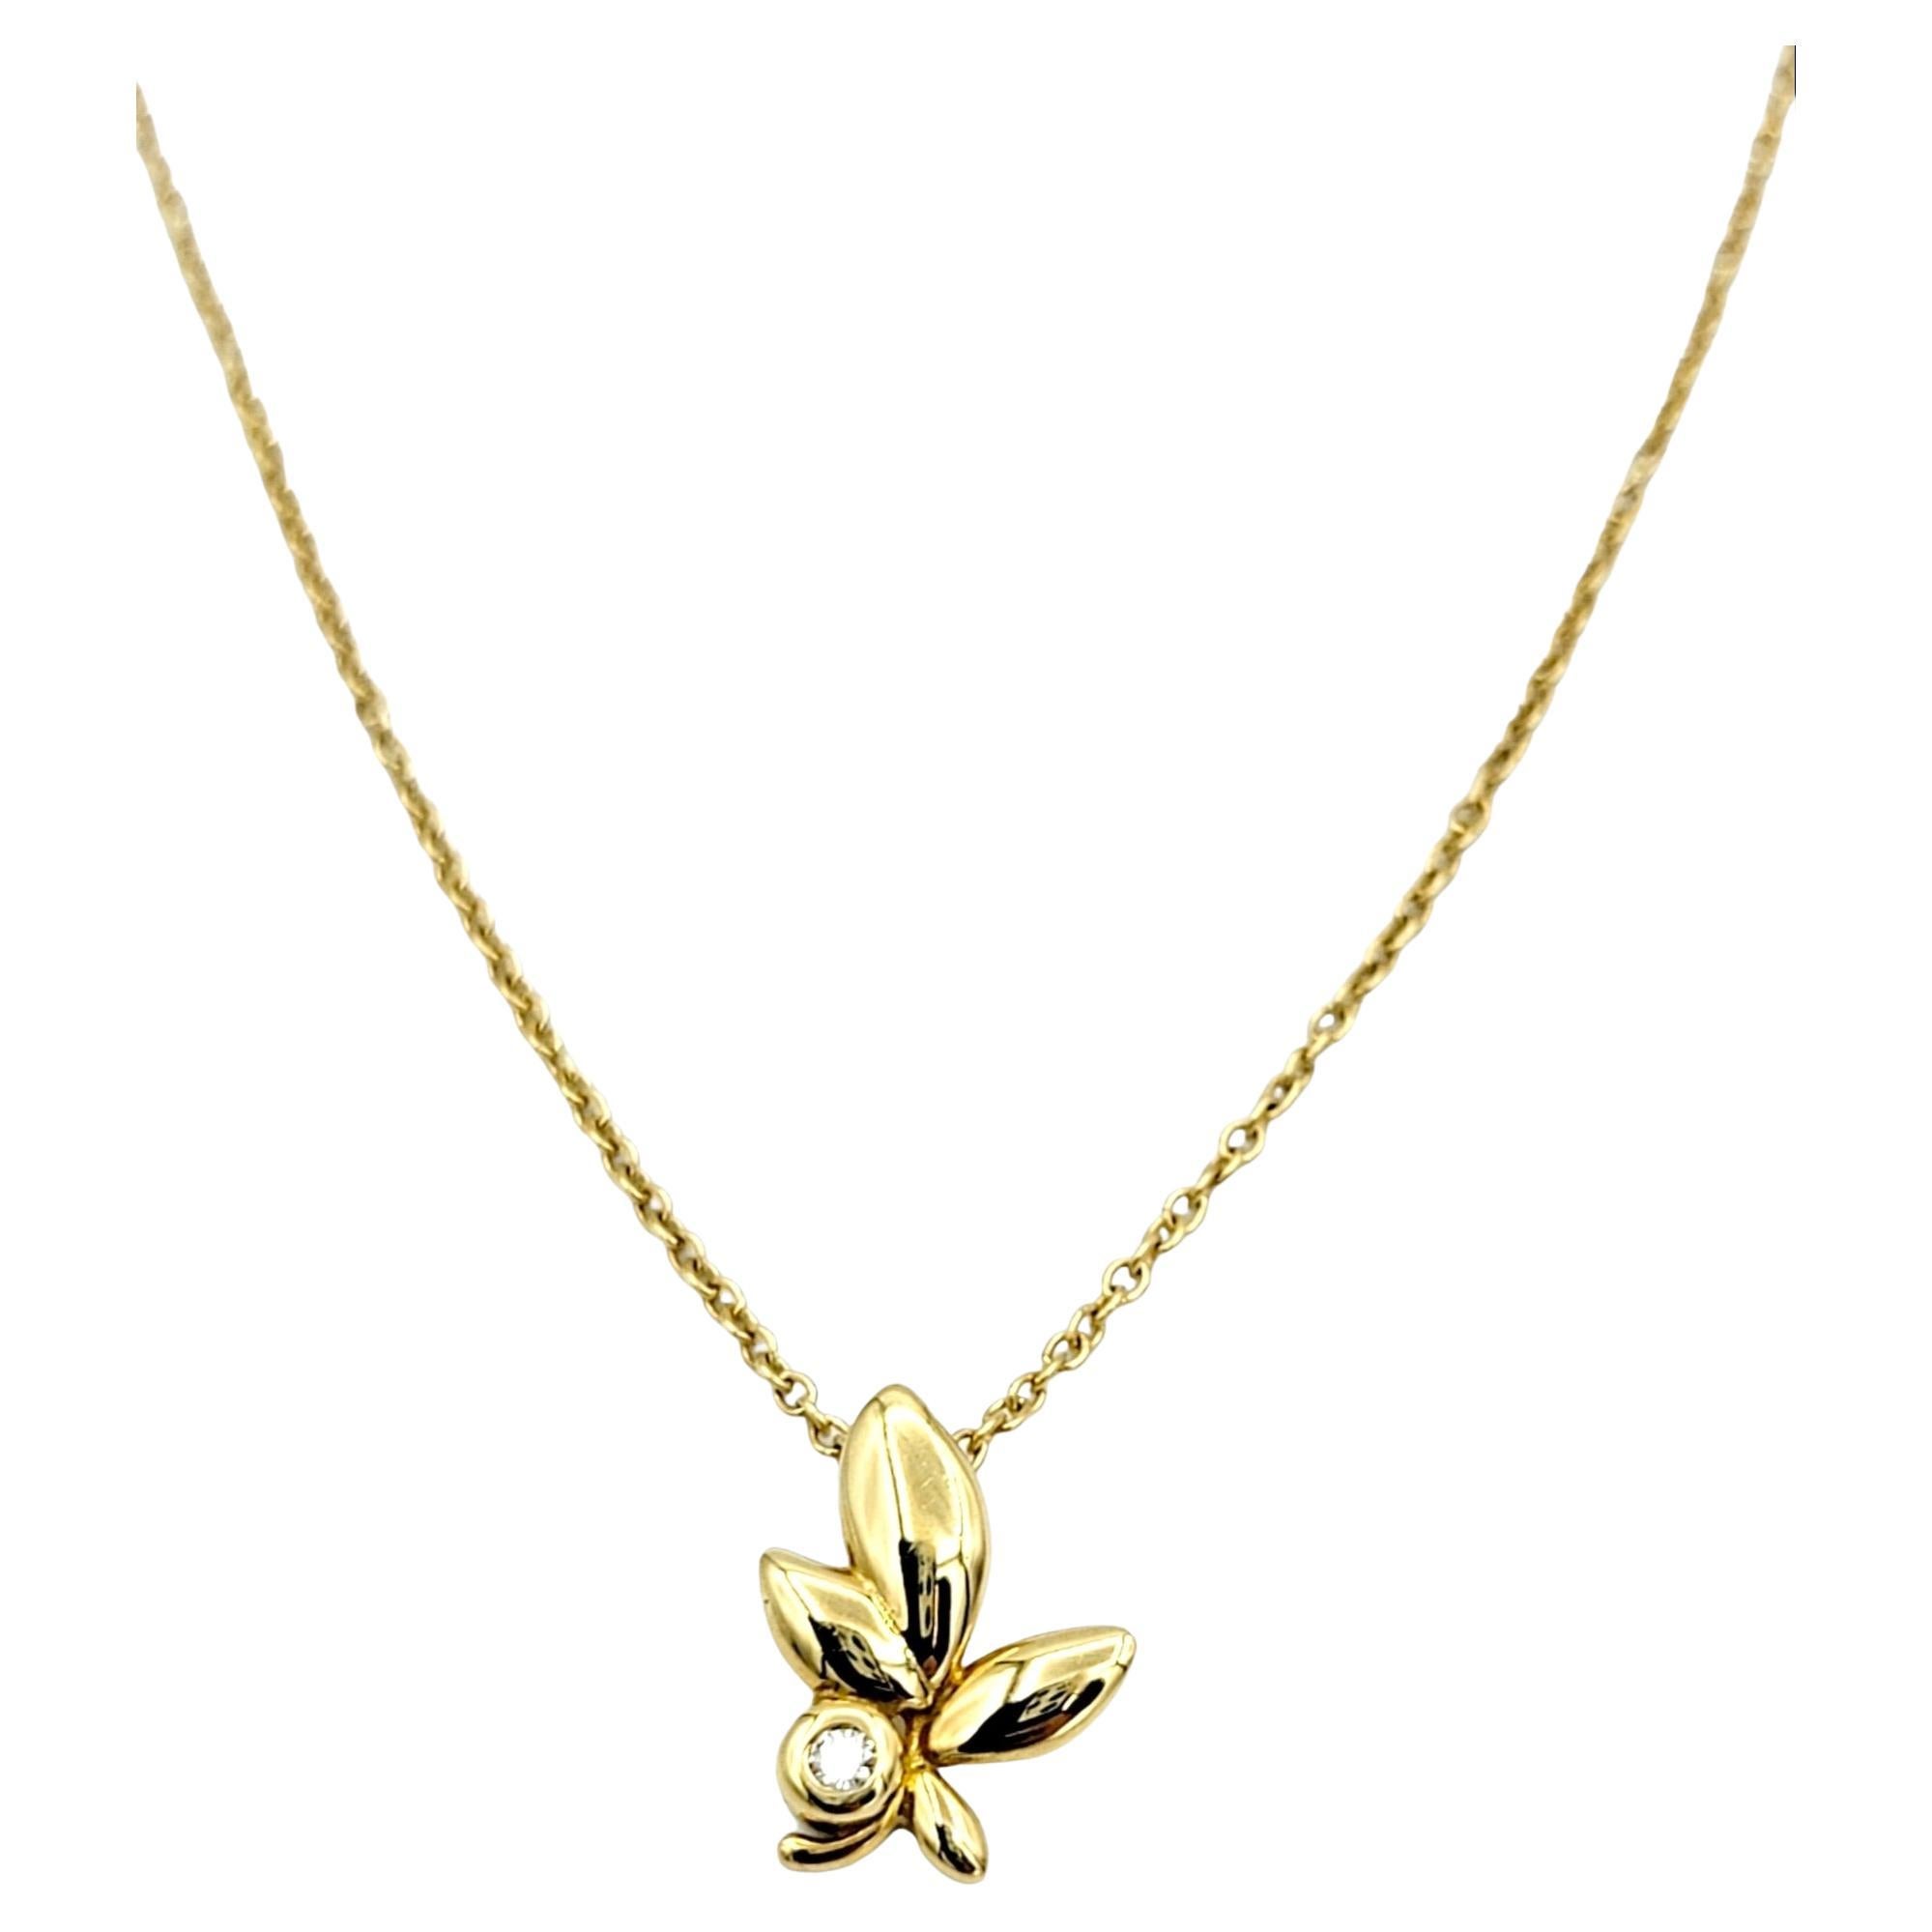 Tiffany & Co. Paloma Picasso Olive Leaf Pendant Necklace with Diamond 18K Gold